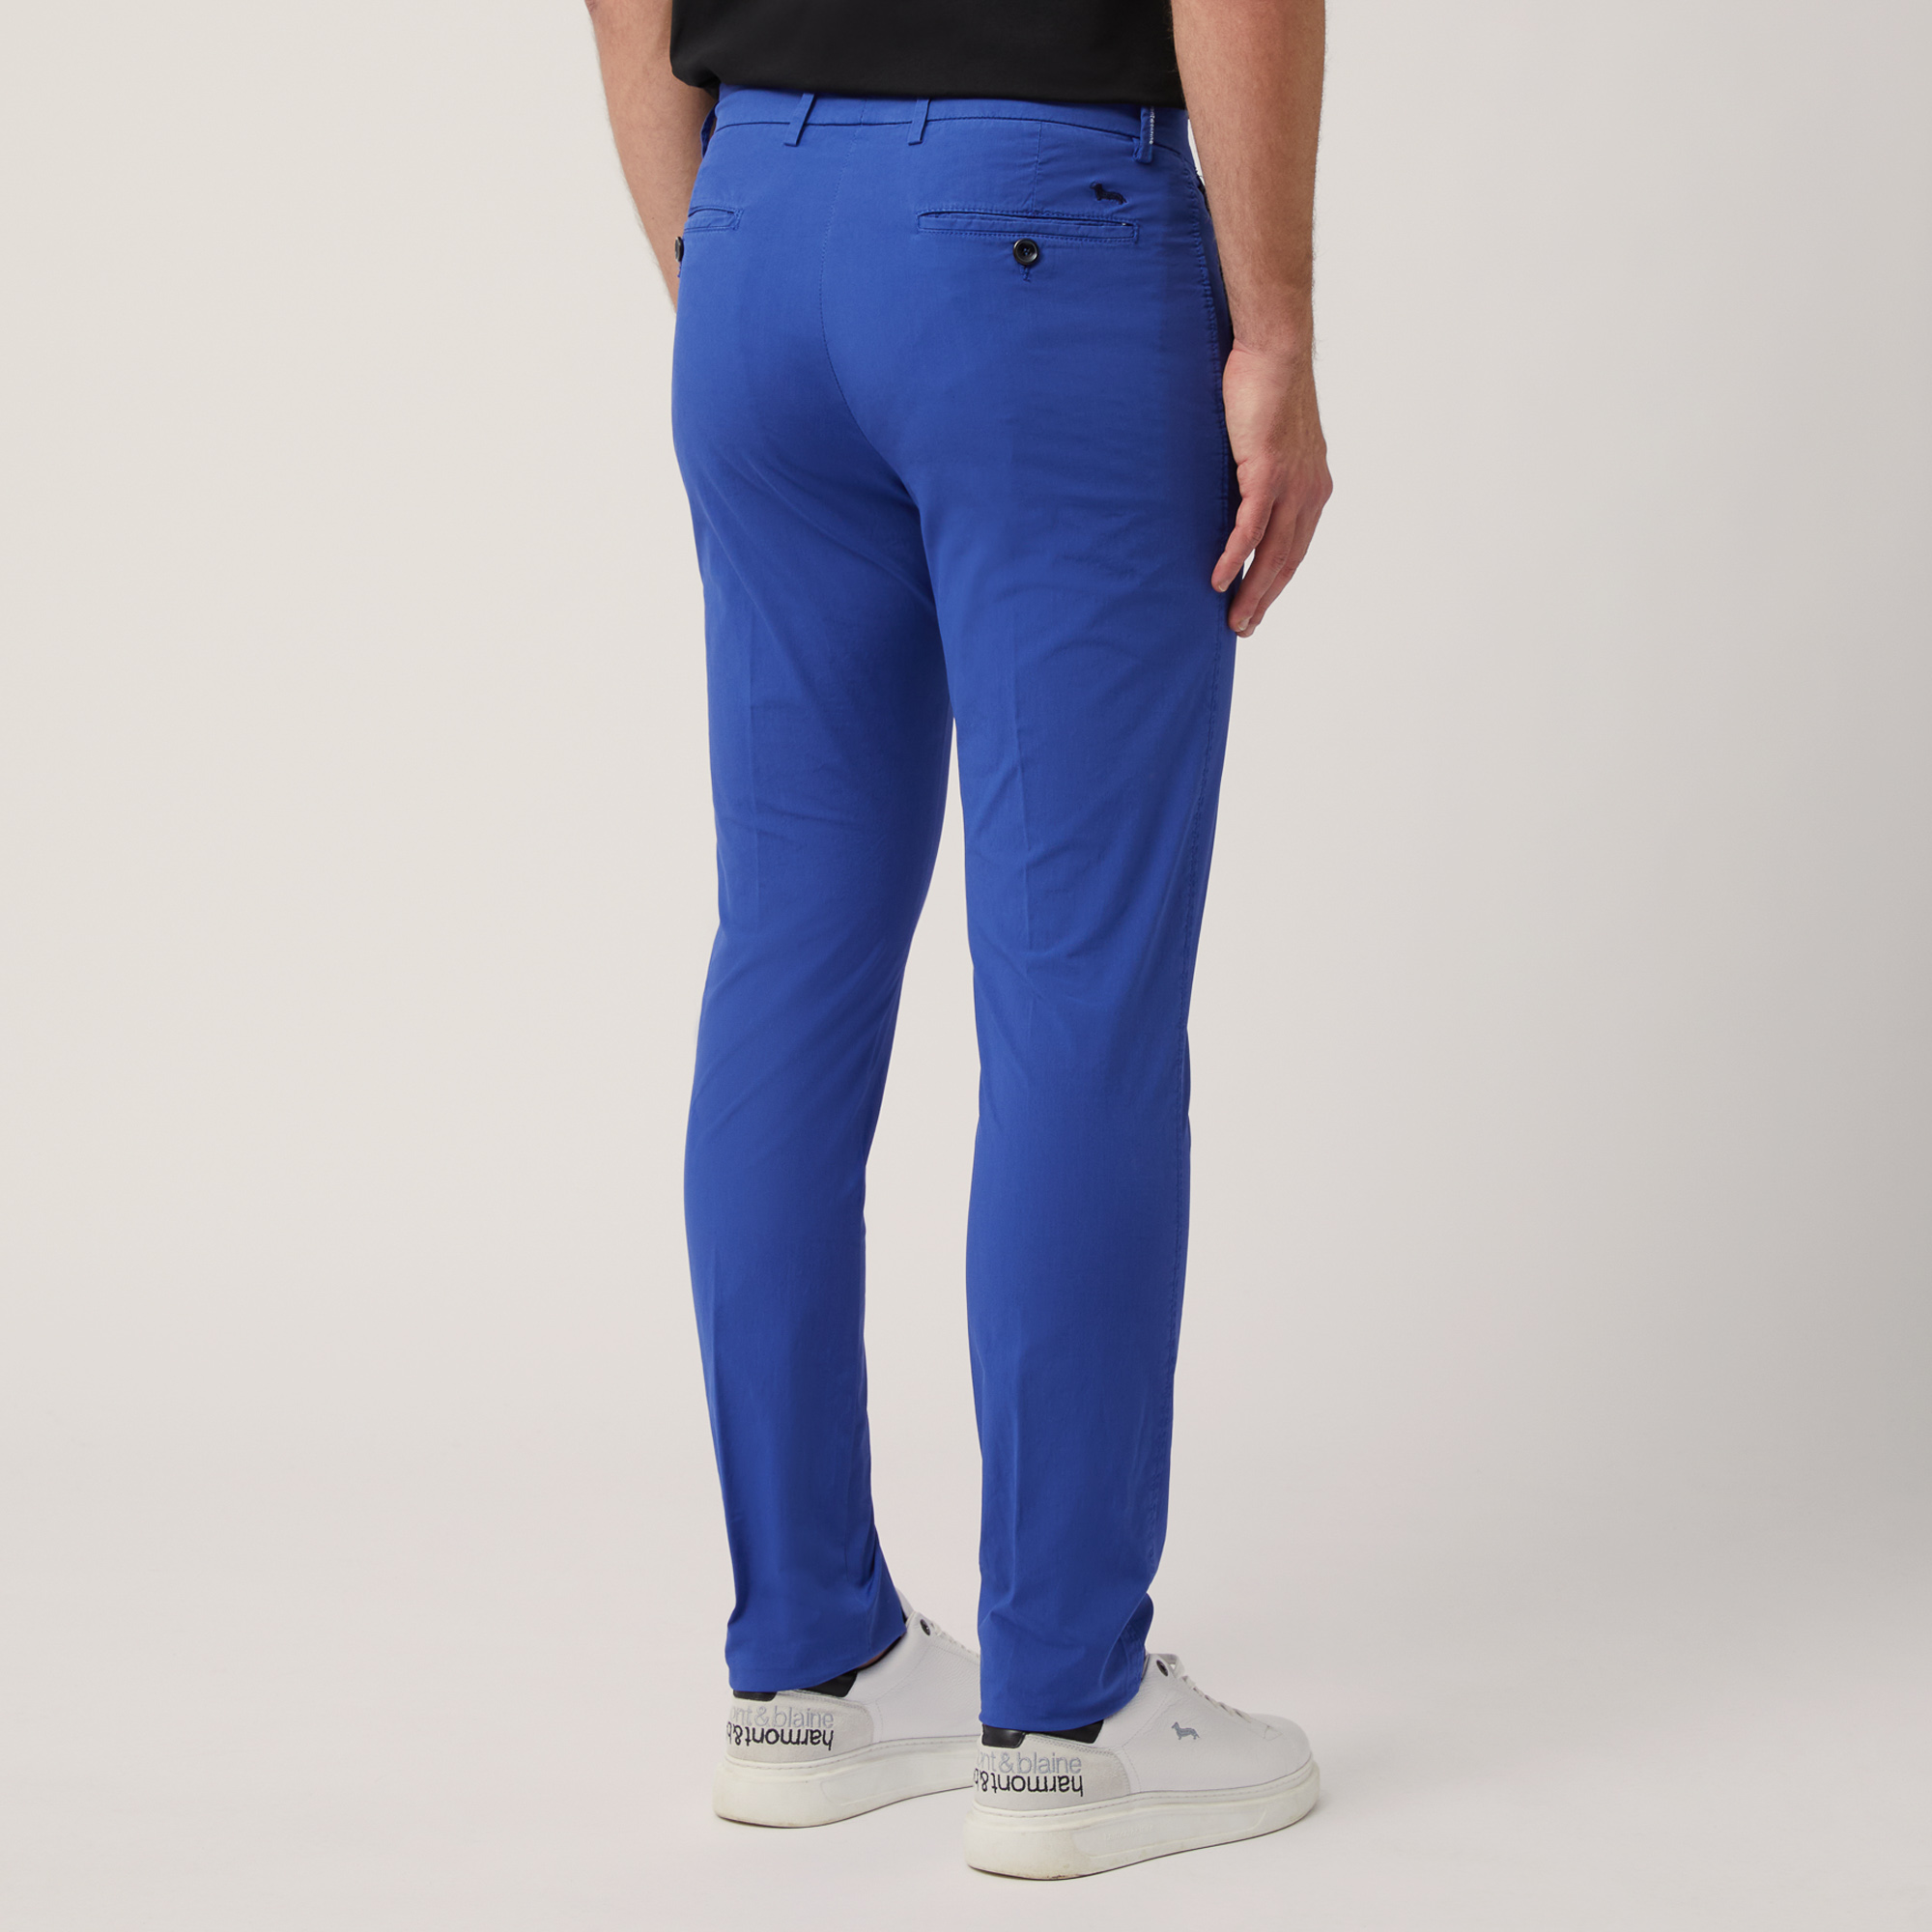 Chino-Hose Narrow Fit, Hortensie, large image number 1